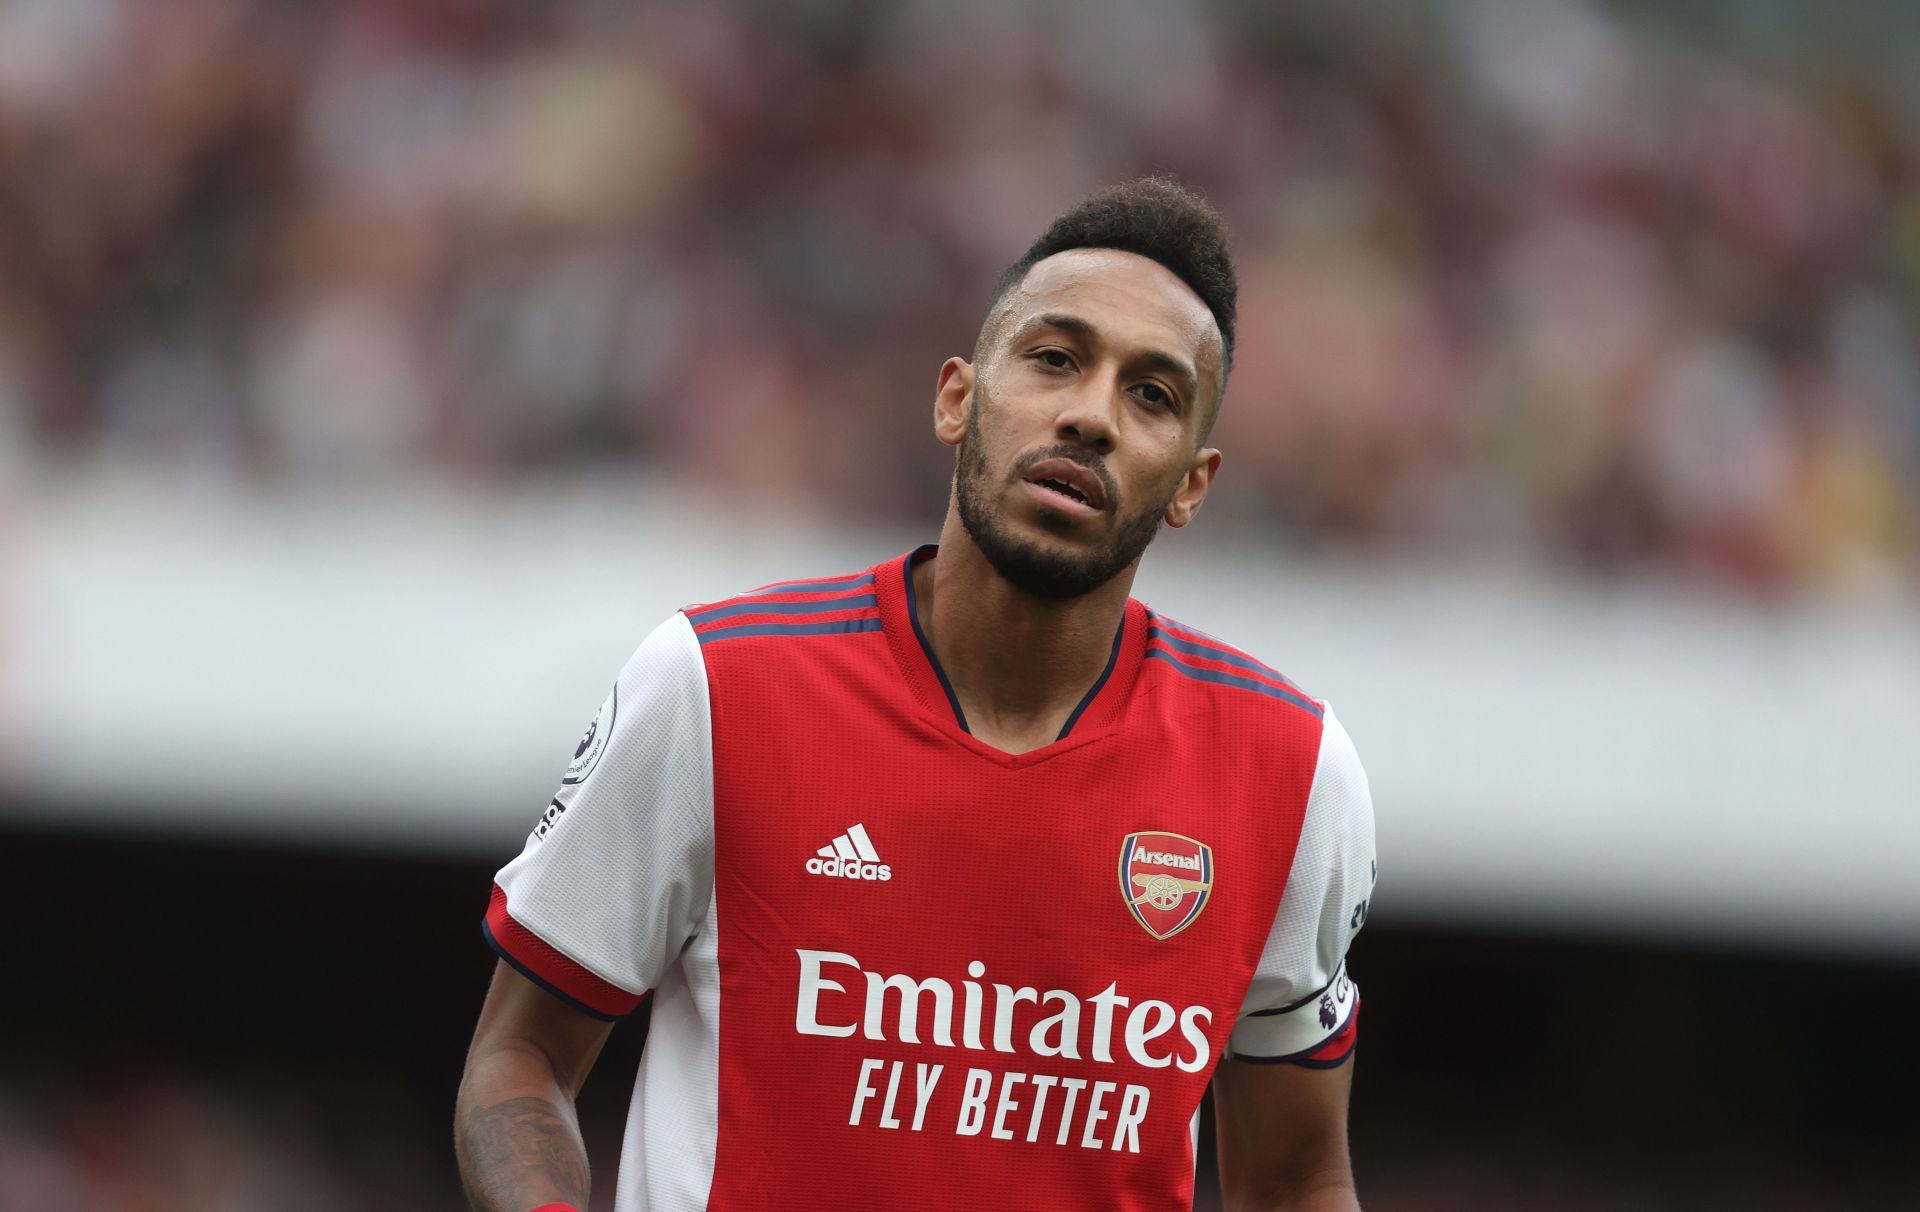 Barcelona will sign Aubameyang on a loan deal but there is a catch